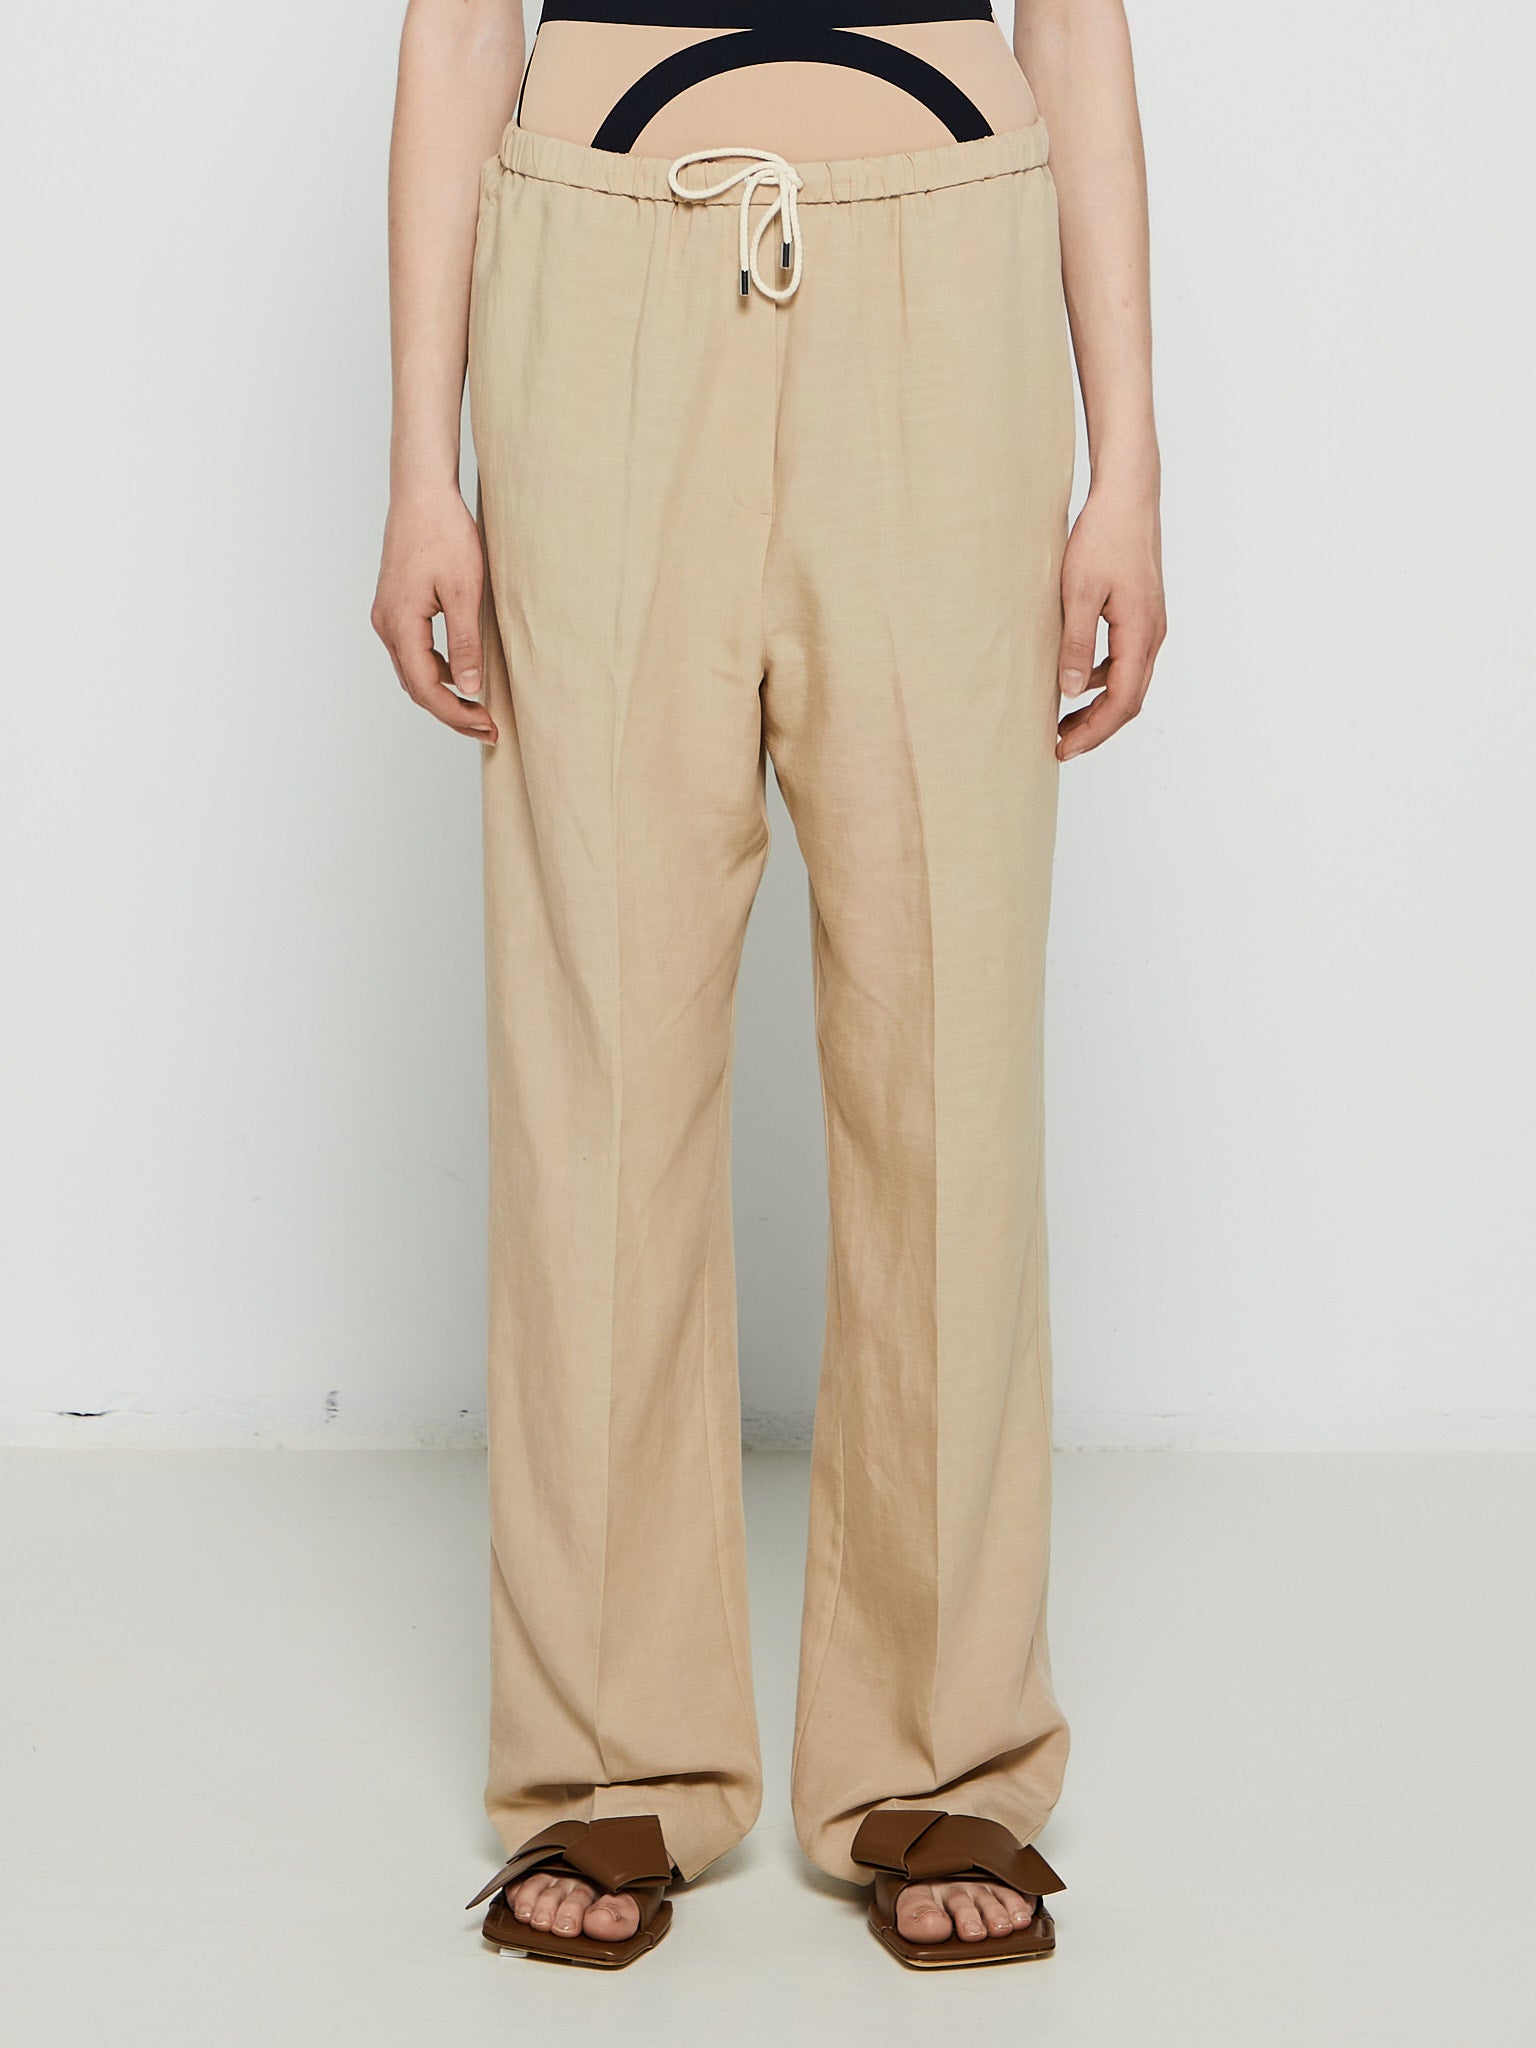 TOTEME - Press-Creased Drawstring Trousers in Overcast Beige